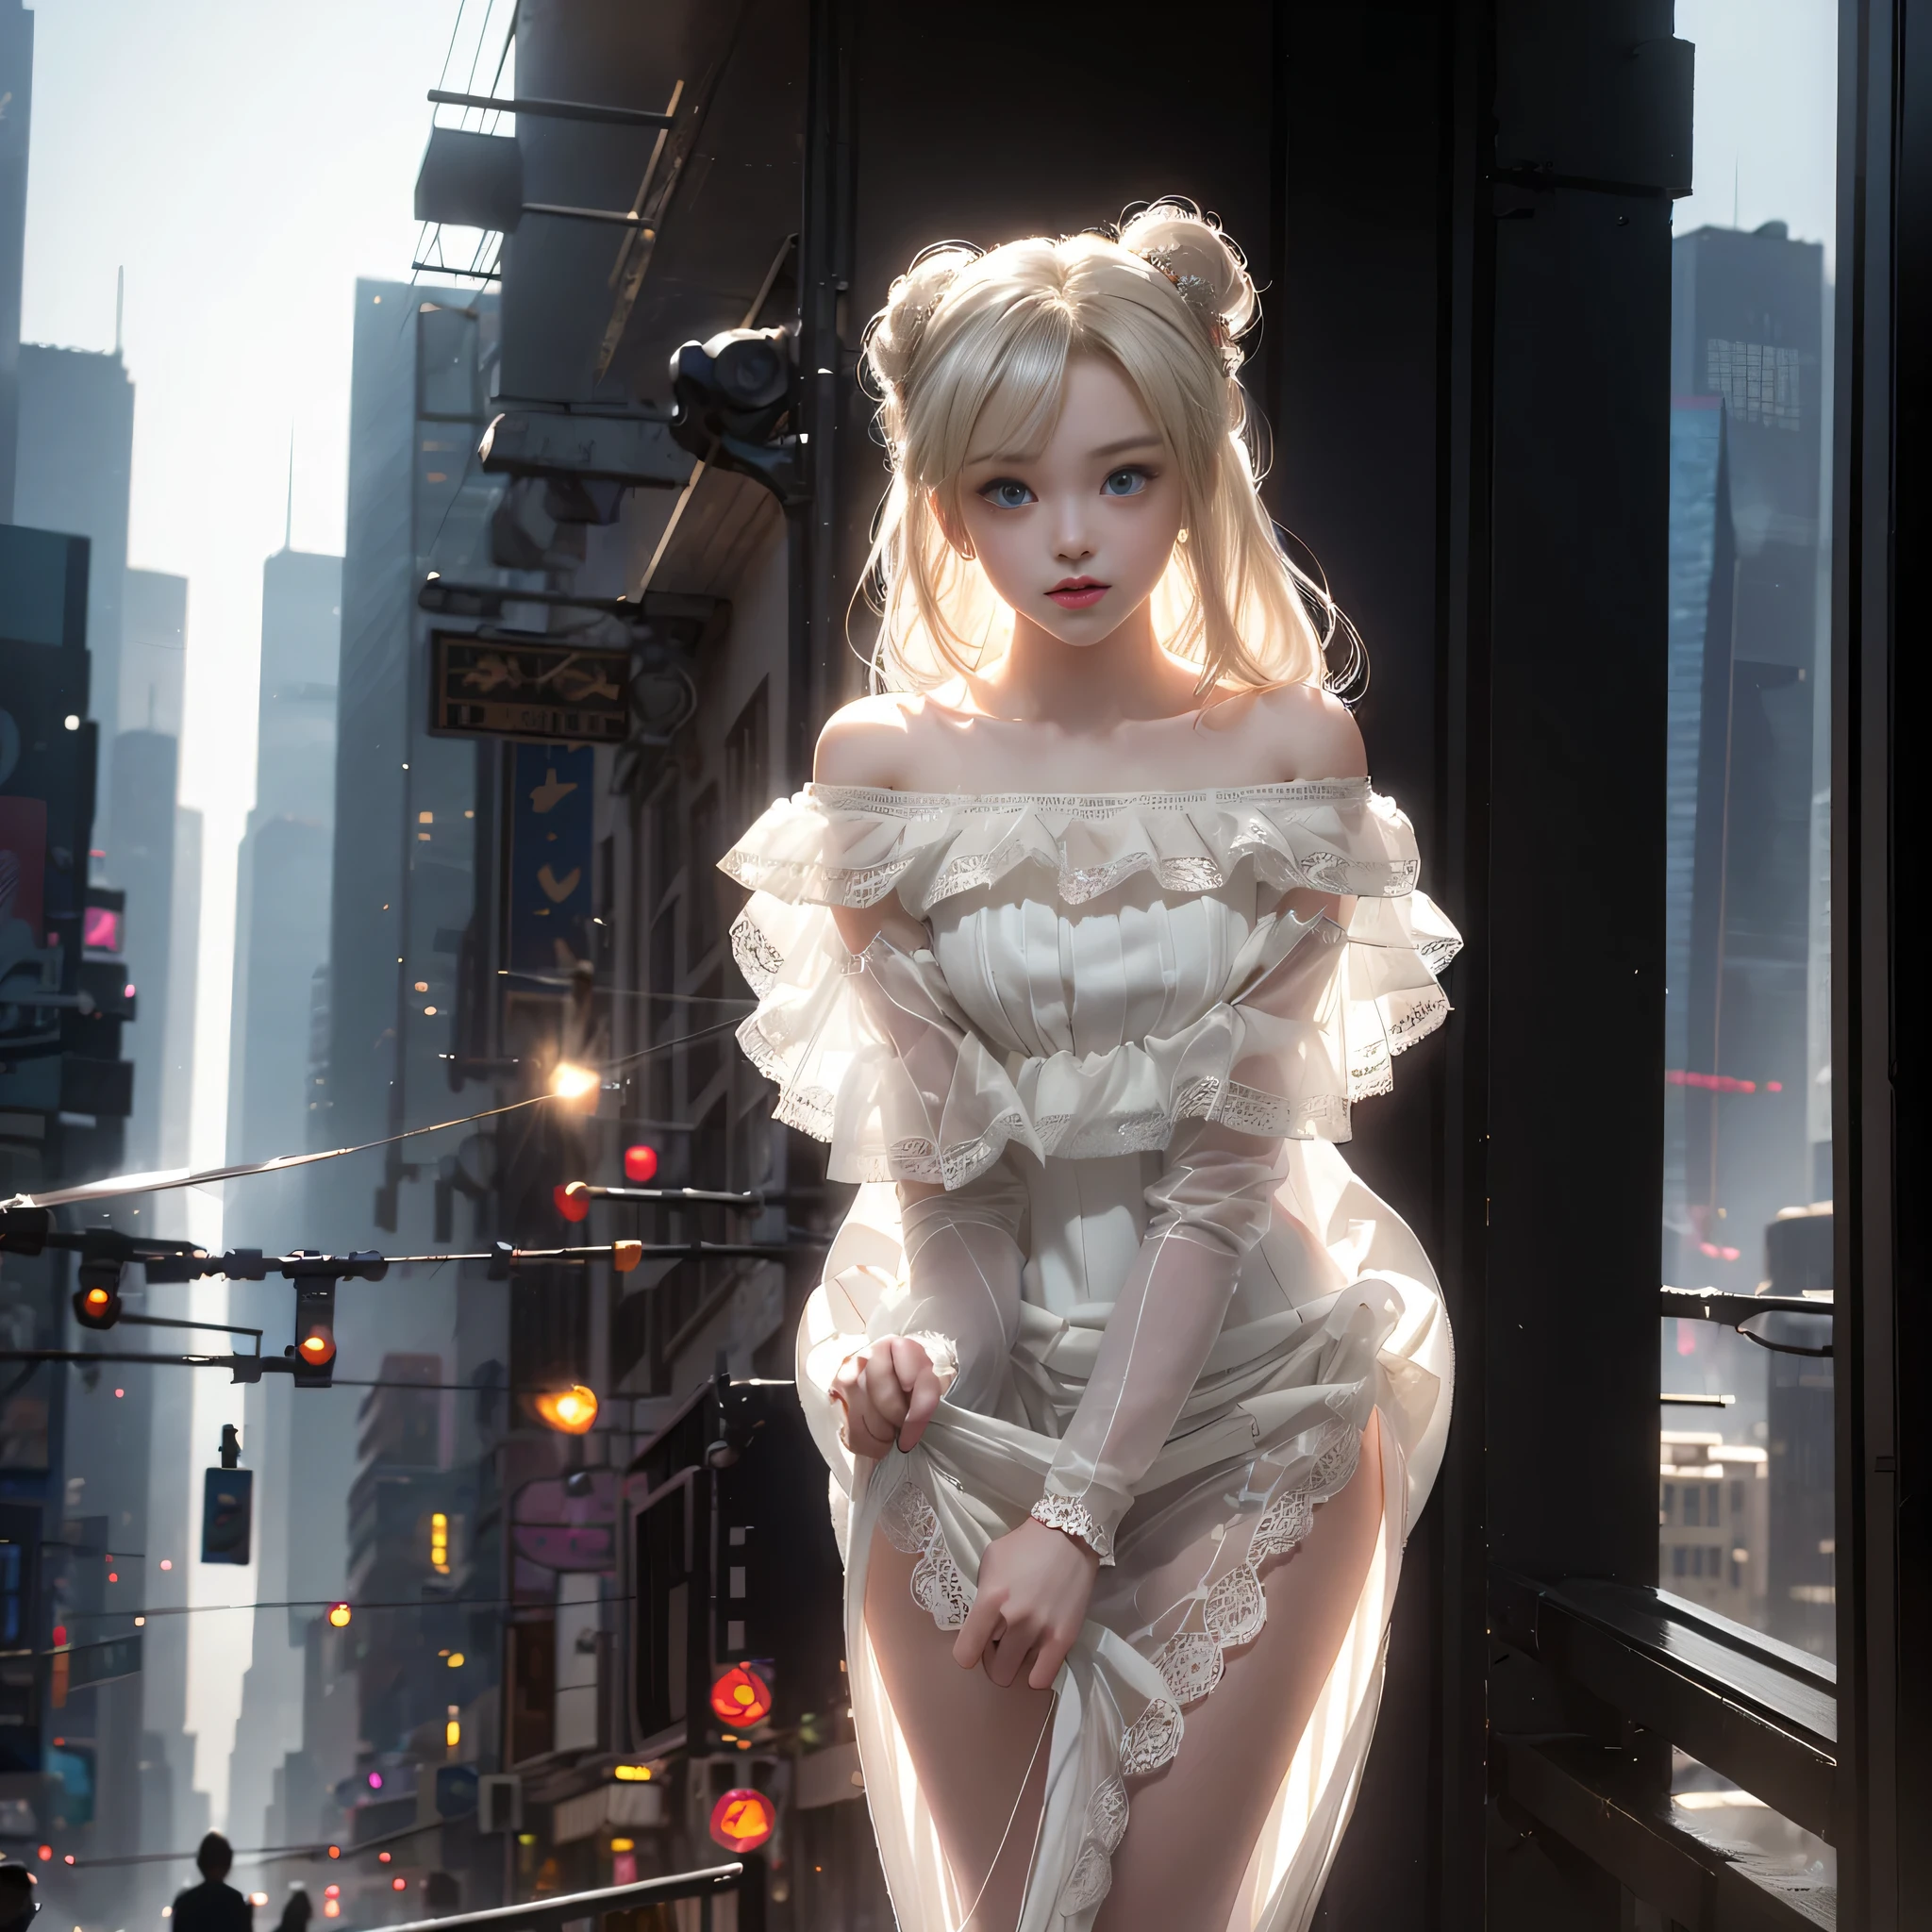 ((girl standing on the street in new york)),bright expression、Young shiny shiny white shiny skin、Best Look Rondo Reflective Light、Platinum blonde hair with dazzling highlights、shiny light hair,、Super long silky straight hair、Beautiful bangs that shine、Glowing crystal clear attractive big blue eyes、Very beautiful nice cute girl、（breasts of medium size,),Beautiful detailed eyes, beautiful detailed nose,(( Full Body Angle:1.5)),Makeup that the eyes emphasize、Royal style，Comic style, , Sub-surface scattering, ornate detail, nature backdrop, Supergianthugebreasts, ((Cinematic)), Dramatic Lighting, masutepiece、((Off-the-shoulder sheer white long dress:1.4))、((Skirt soaring in the wind)),(Floating skirt),(Holding the skirt with both hands), (high-heels）、(White lace panties are visible),1 girl in、Ultra realistic 8K CG, 絵のようにflawlessな顔, flawless, clean, masutepiece, Professional artwork, famousartwork, Perfect face, Beautiful face, beautiful lawless female body)), Solo,(Immersive atmosphere, Chiaroscuro:1.5,Bright light:1.2,Luminous lighting),(blush:0.5),fascinated expression,Extremely detailed_Eyes,thick thighs,Large,beautifullydetailedbackground,depth of fields,Realistic:1.3, （low angle di, ambient lights:1.3),(Cinematic composition:1.3(nffsw:0.1),((Hazy skyscrapers))